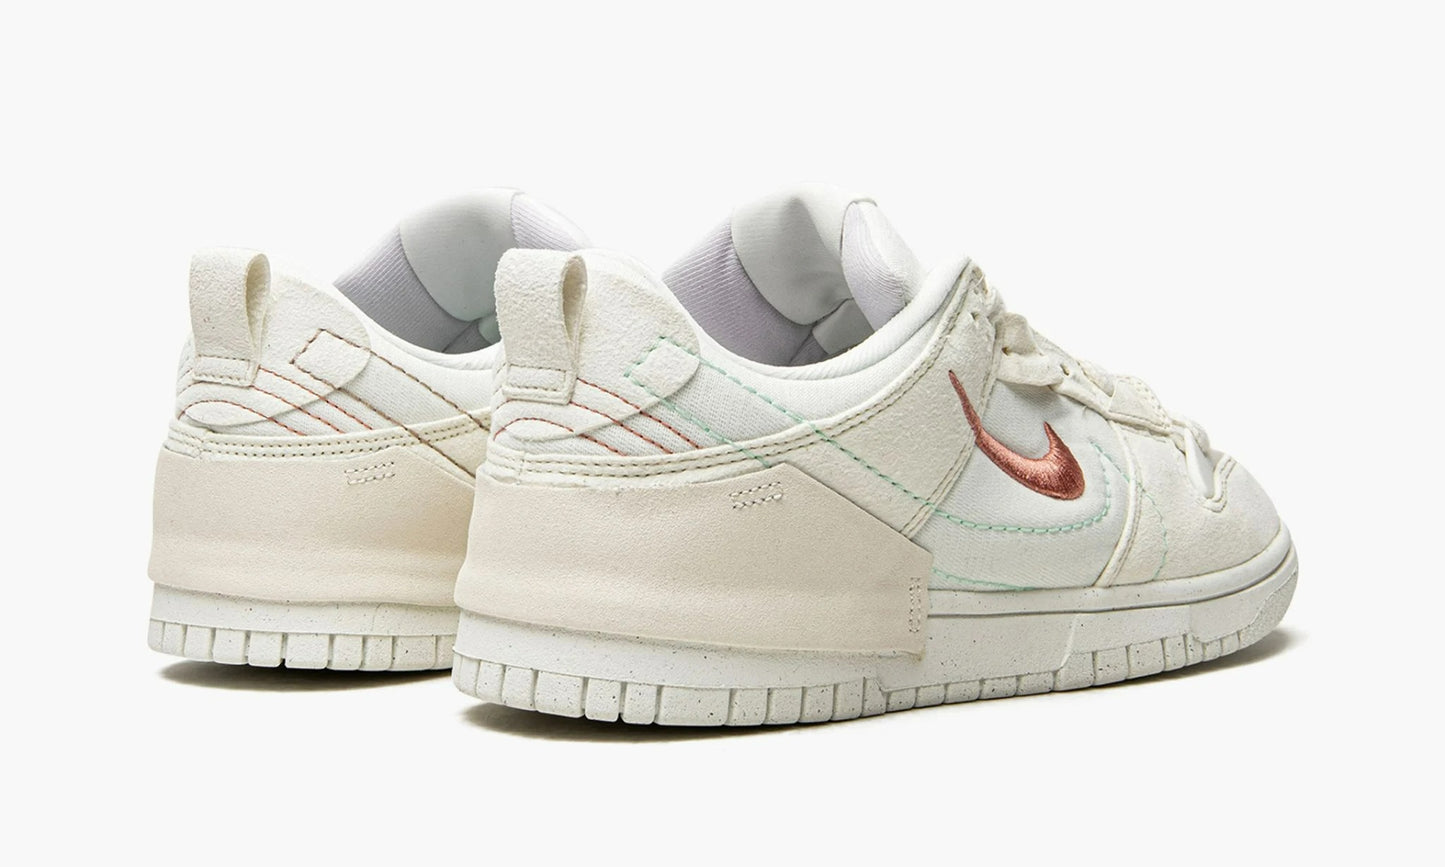 Dunk Low Disrupt 2 Pale Ivory - DH4402 100 | The Sortage